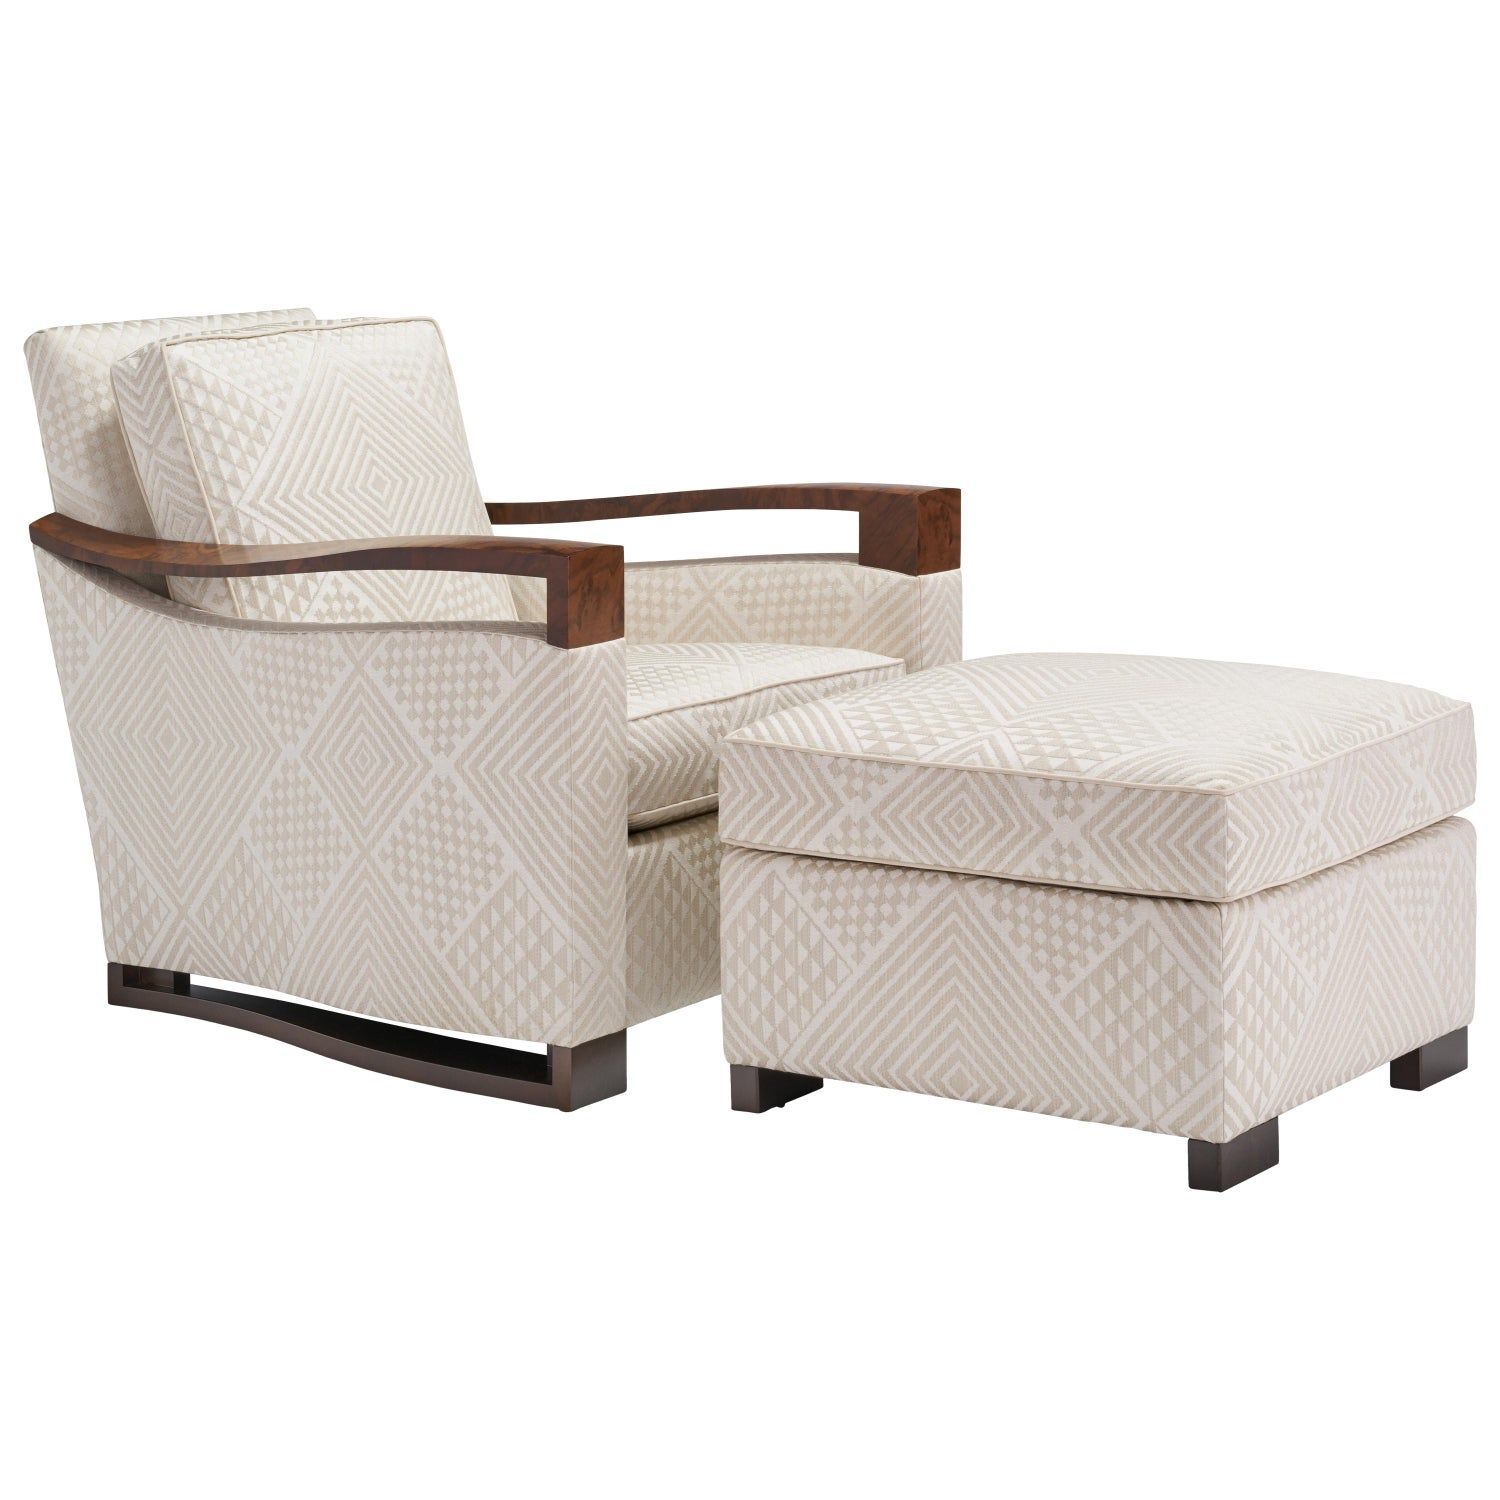 Donghia Woodbridge Club Chair And Ottoman In Cream Upholstery Within Brushed Geometric Pattern Ottomans (View 18 of 20)